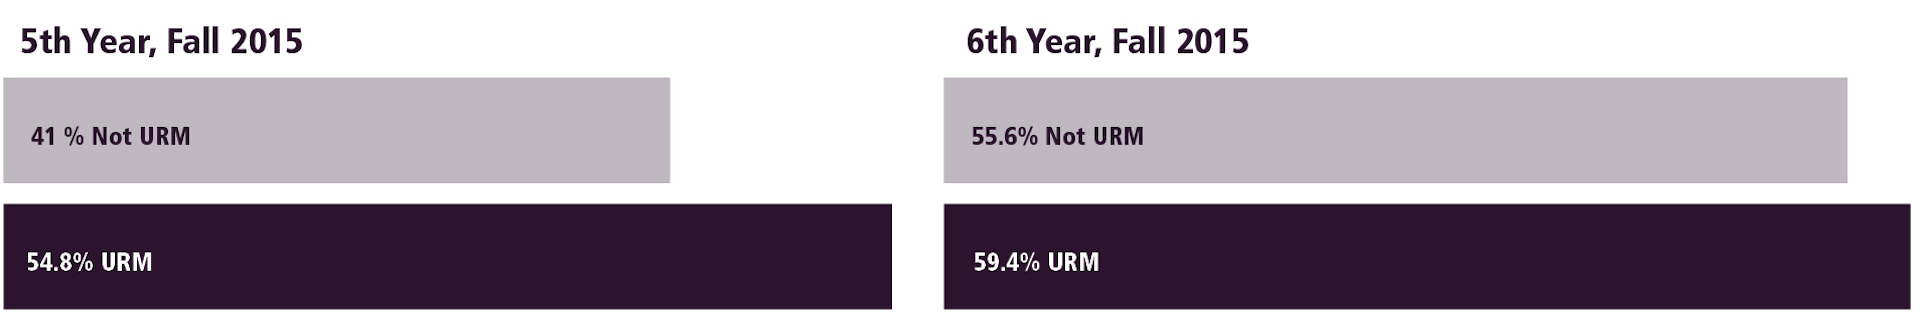 Bar graph showing URM and Not URM Graduation Rates for Fall 2015